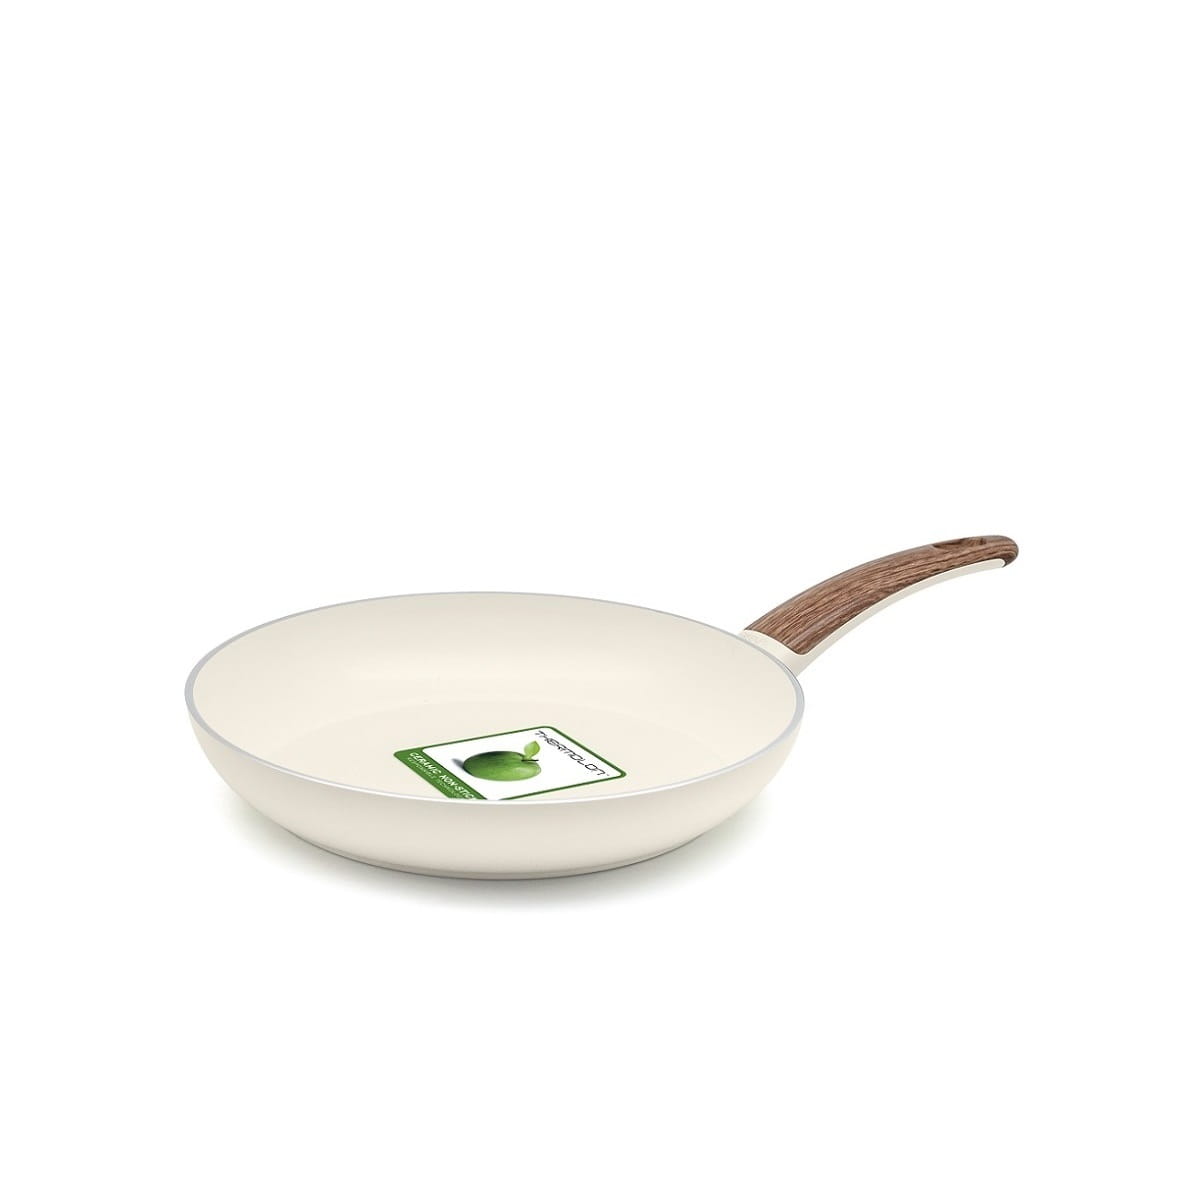 CC000817-001 - Wood-Be Frying Pan, Cream White - 24cm - Product Image 1